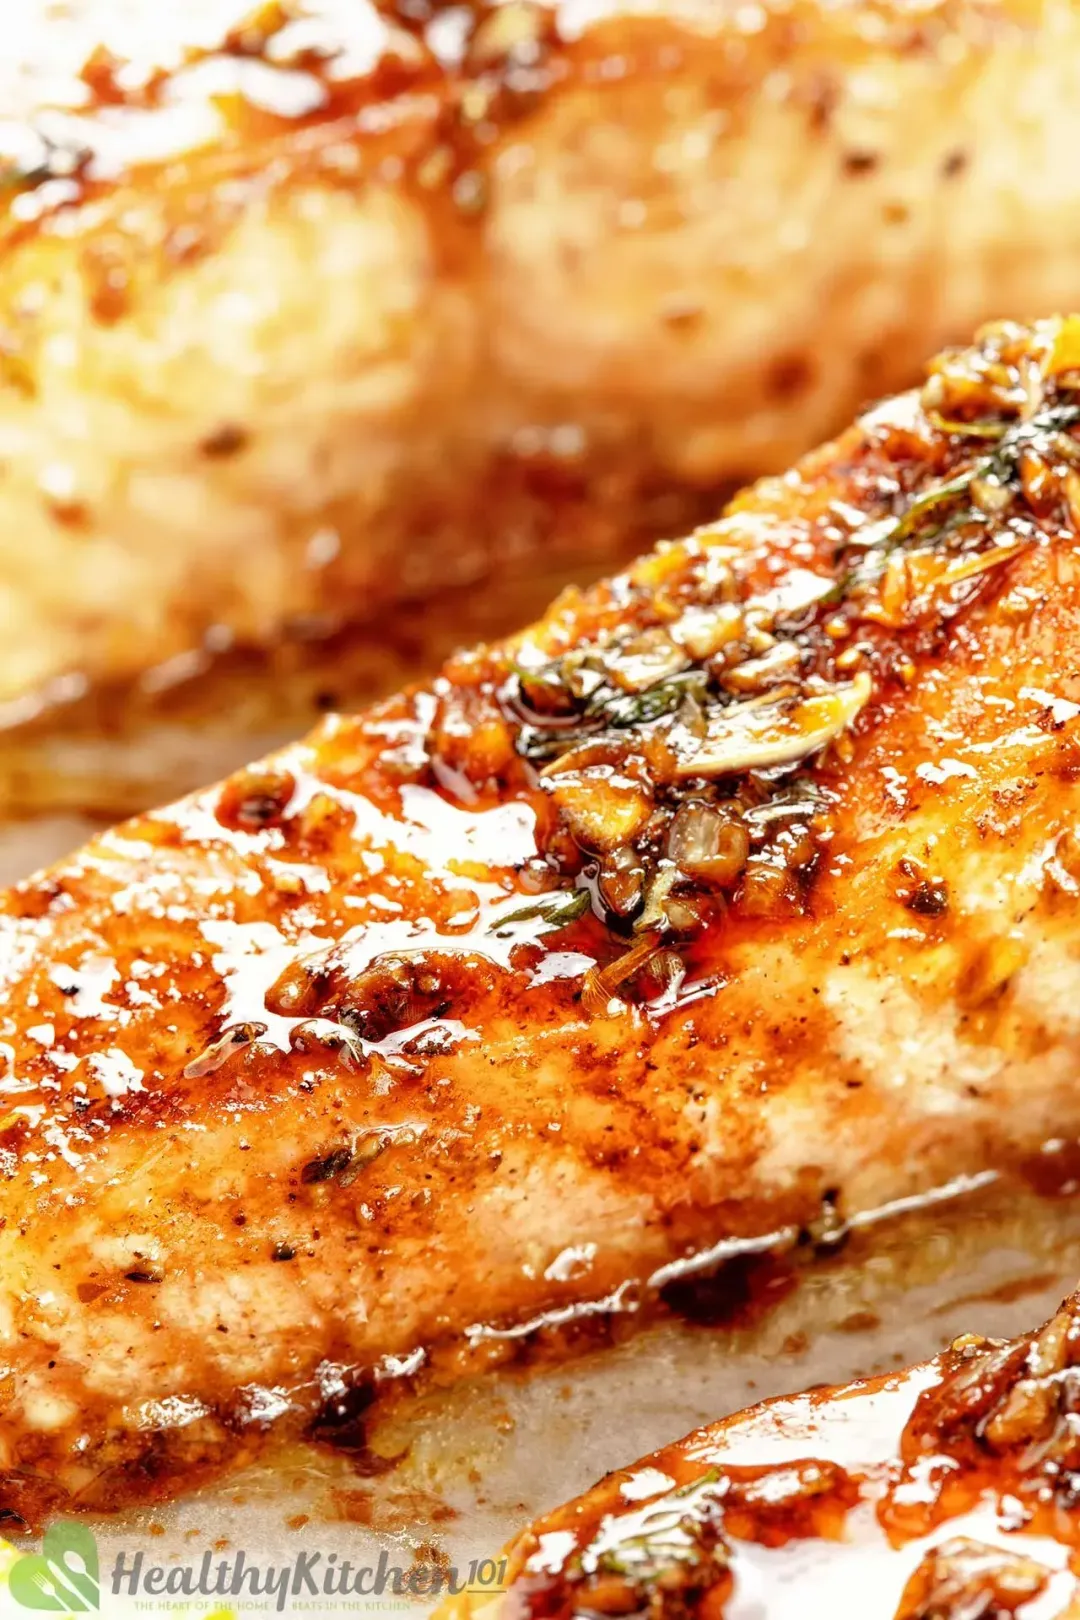 The Difference Between Bake and Broiled salmon